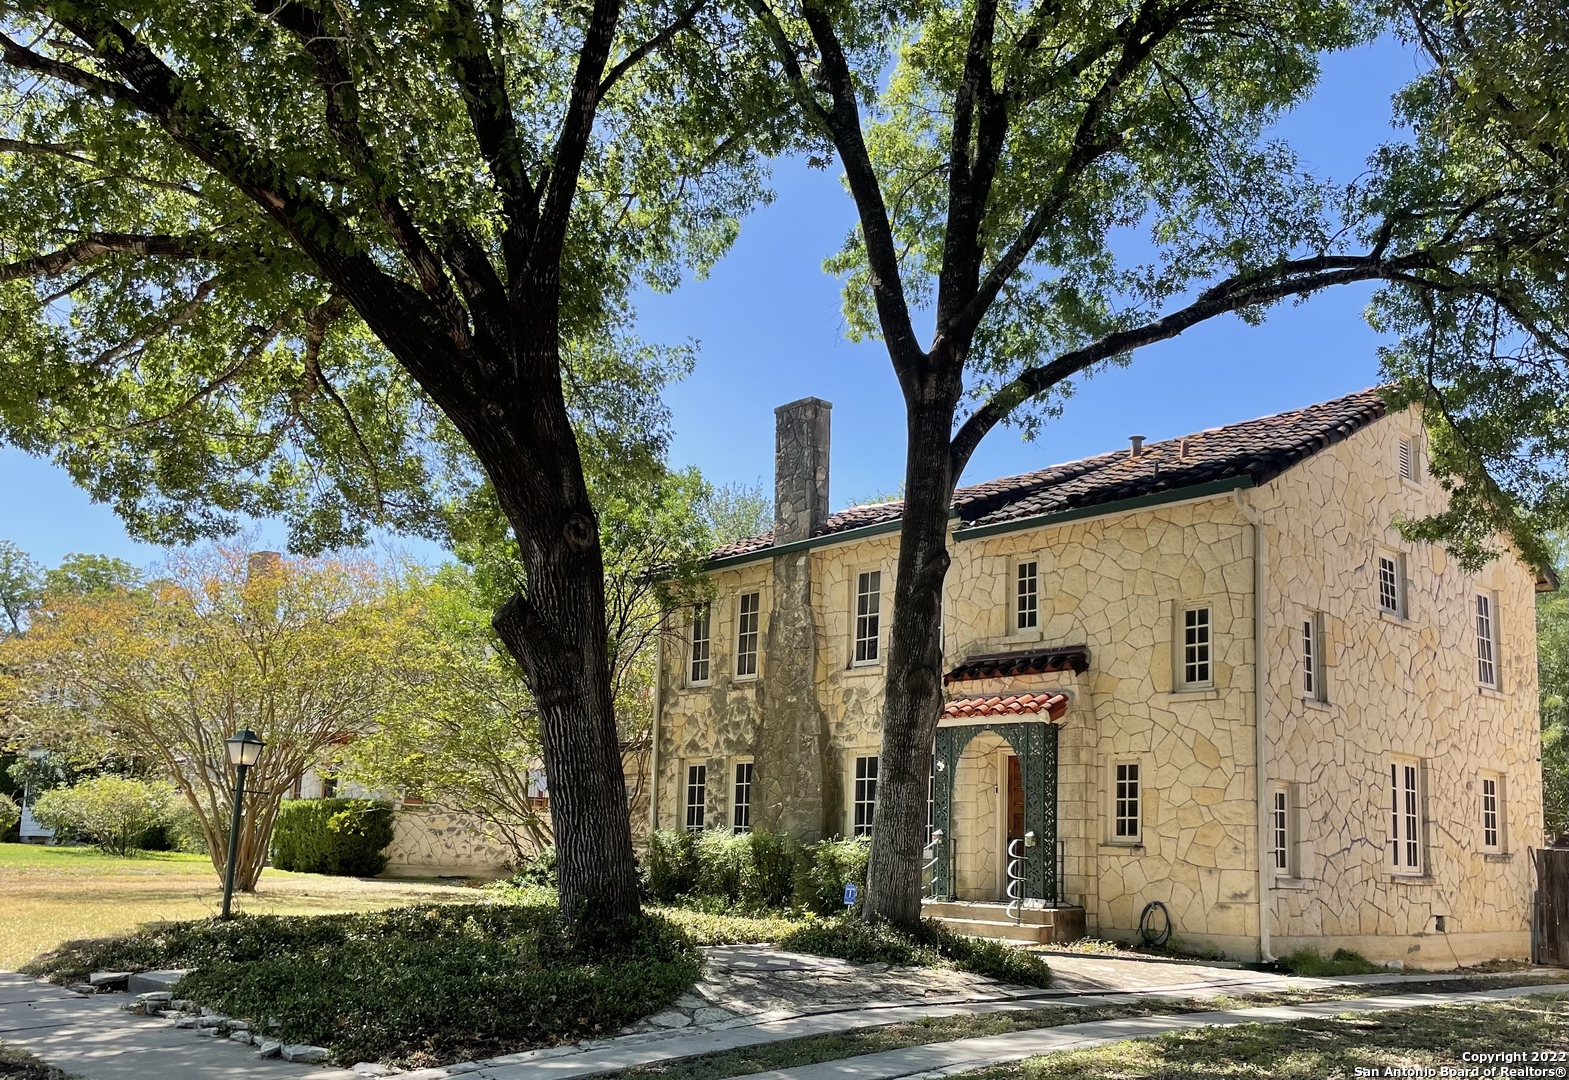 Photo of 432 Mary Louise Dr in San Antonio, TX